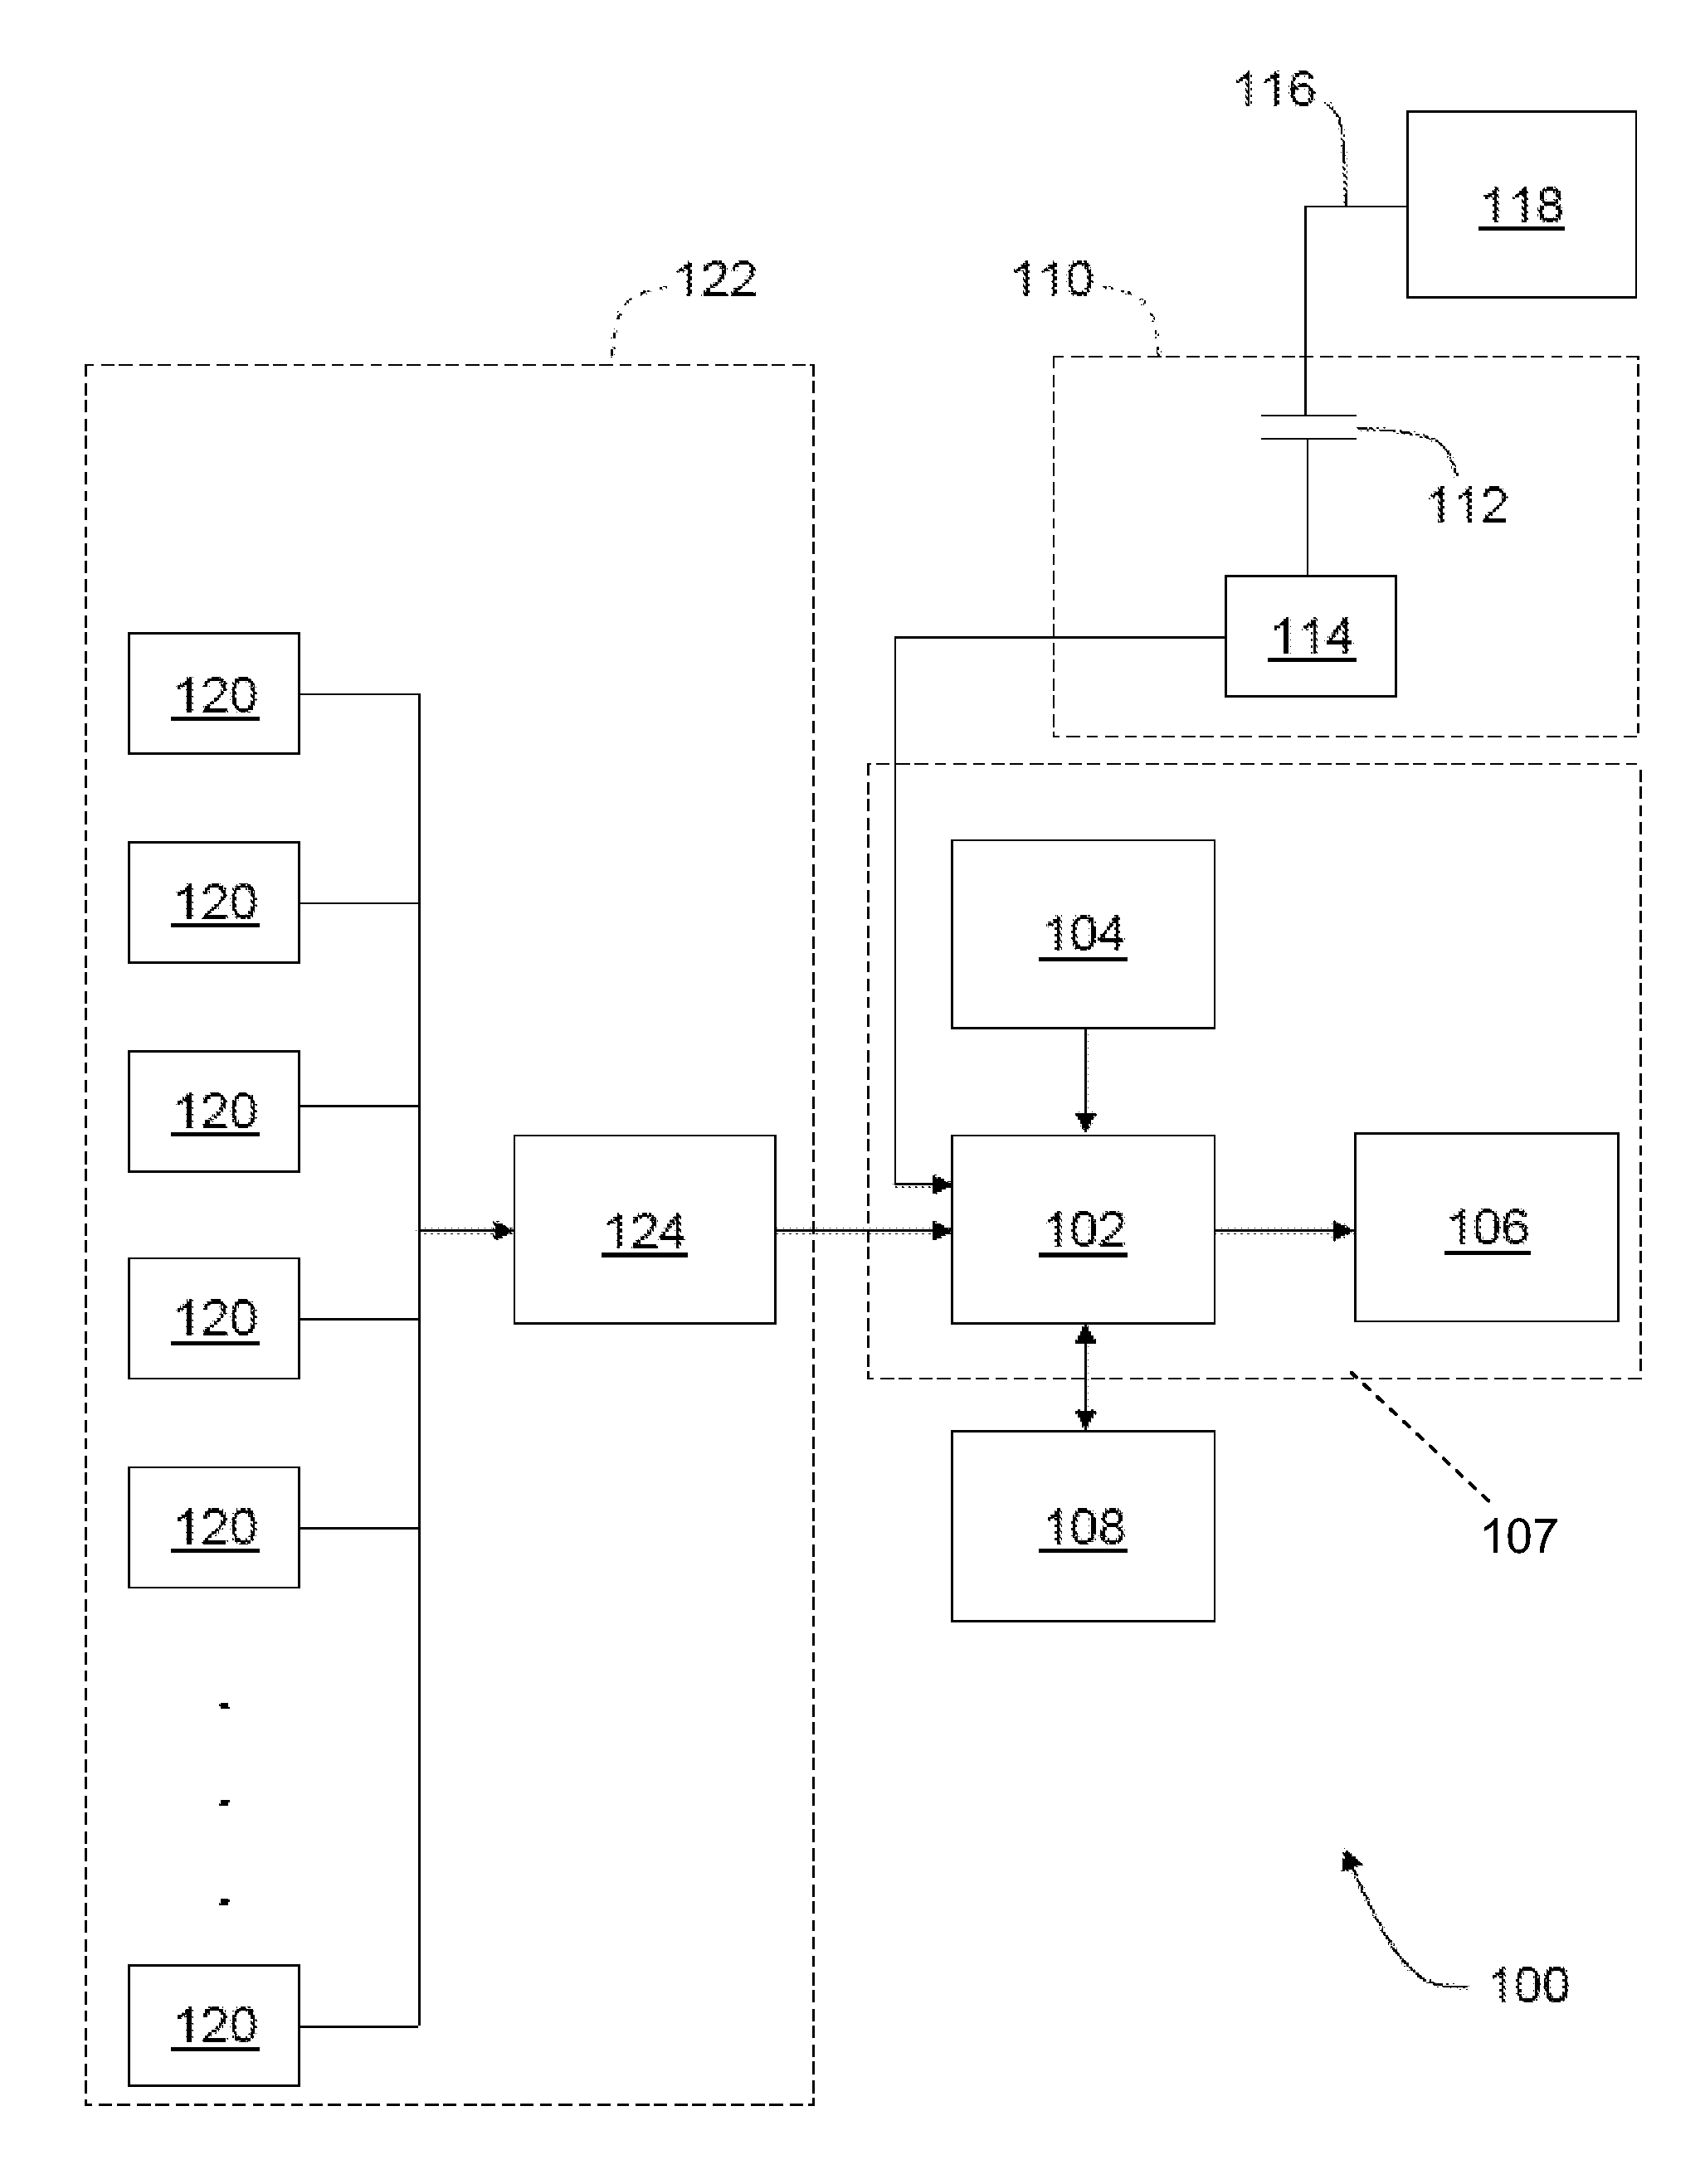 Method and apparatus for analyzing partial discharges in electrical devices